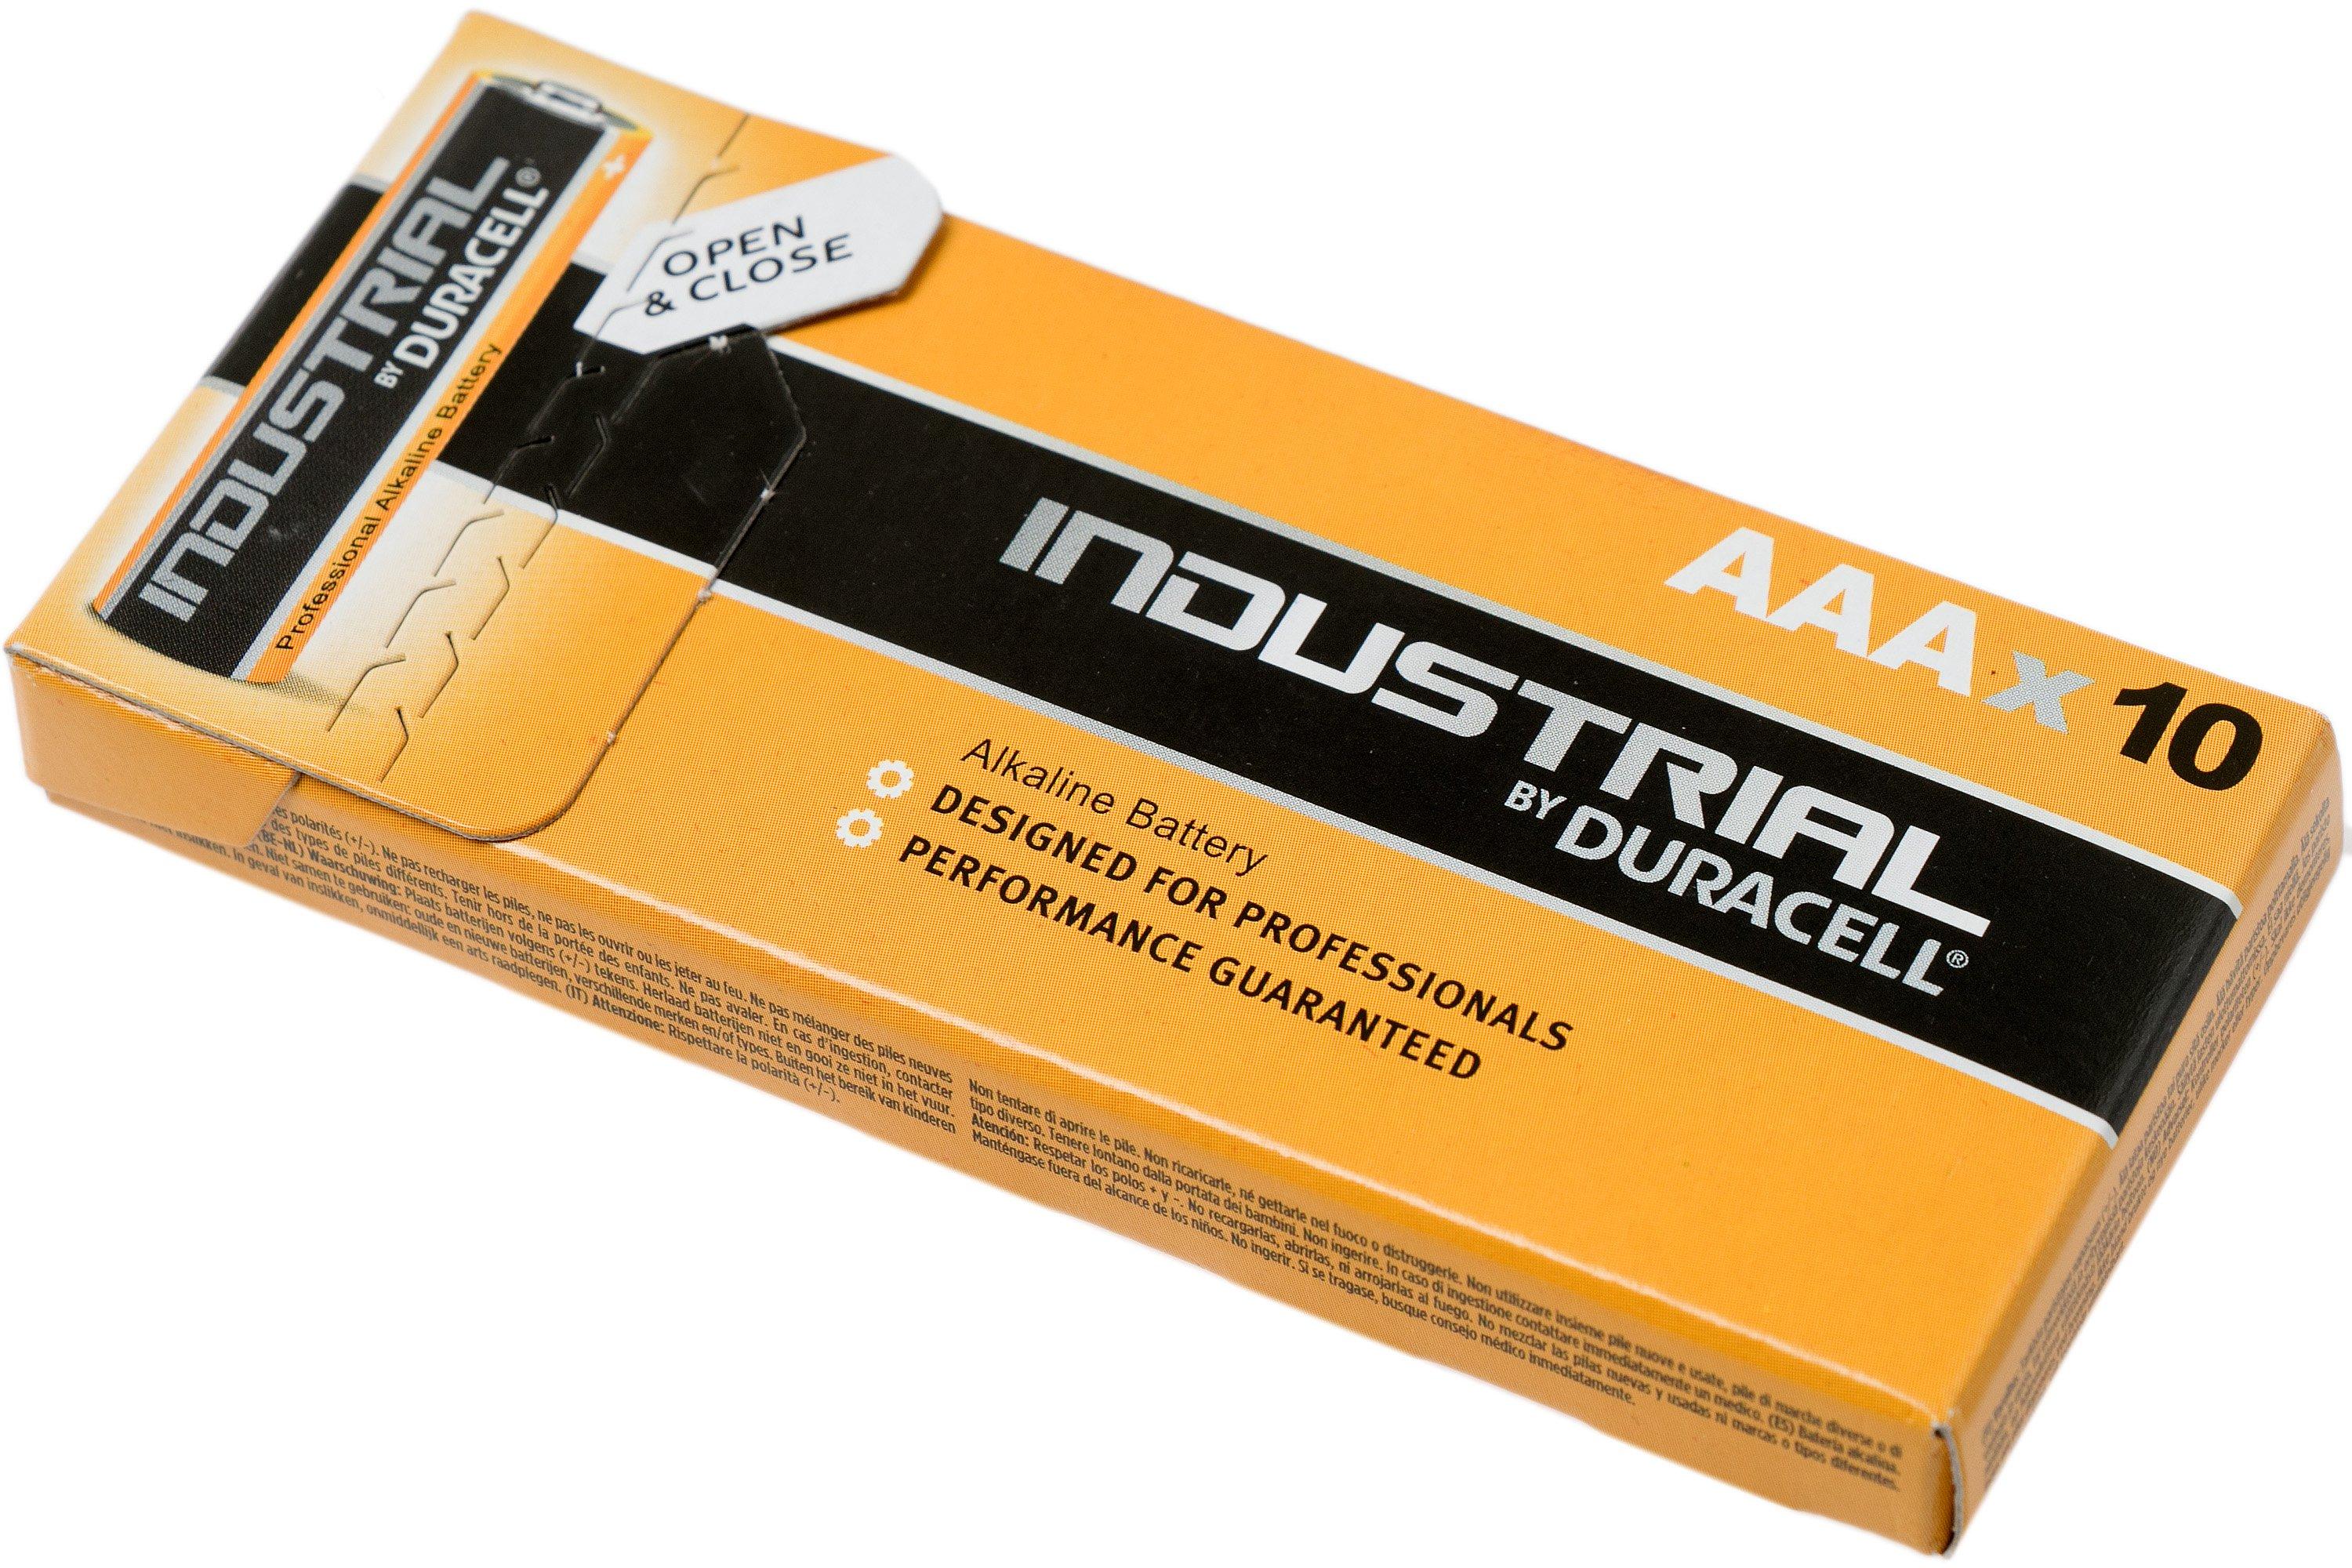 NEW Original Box Sealed 5000394107229 Box Of 10 Duracell Duracell Industrial AAA Batteries Exp 2023 